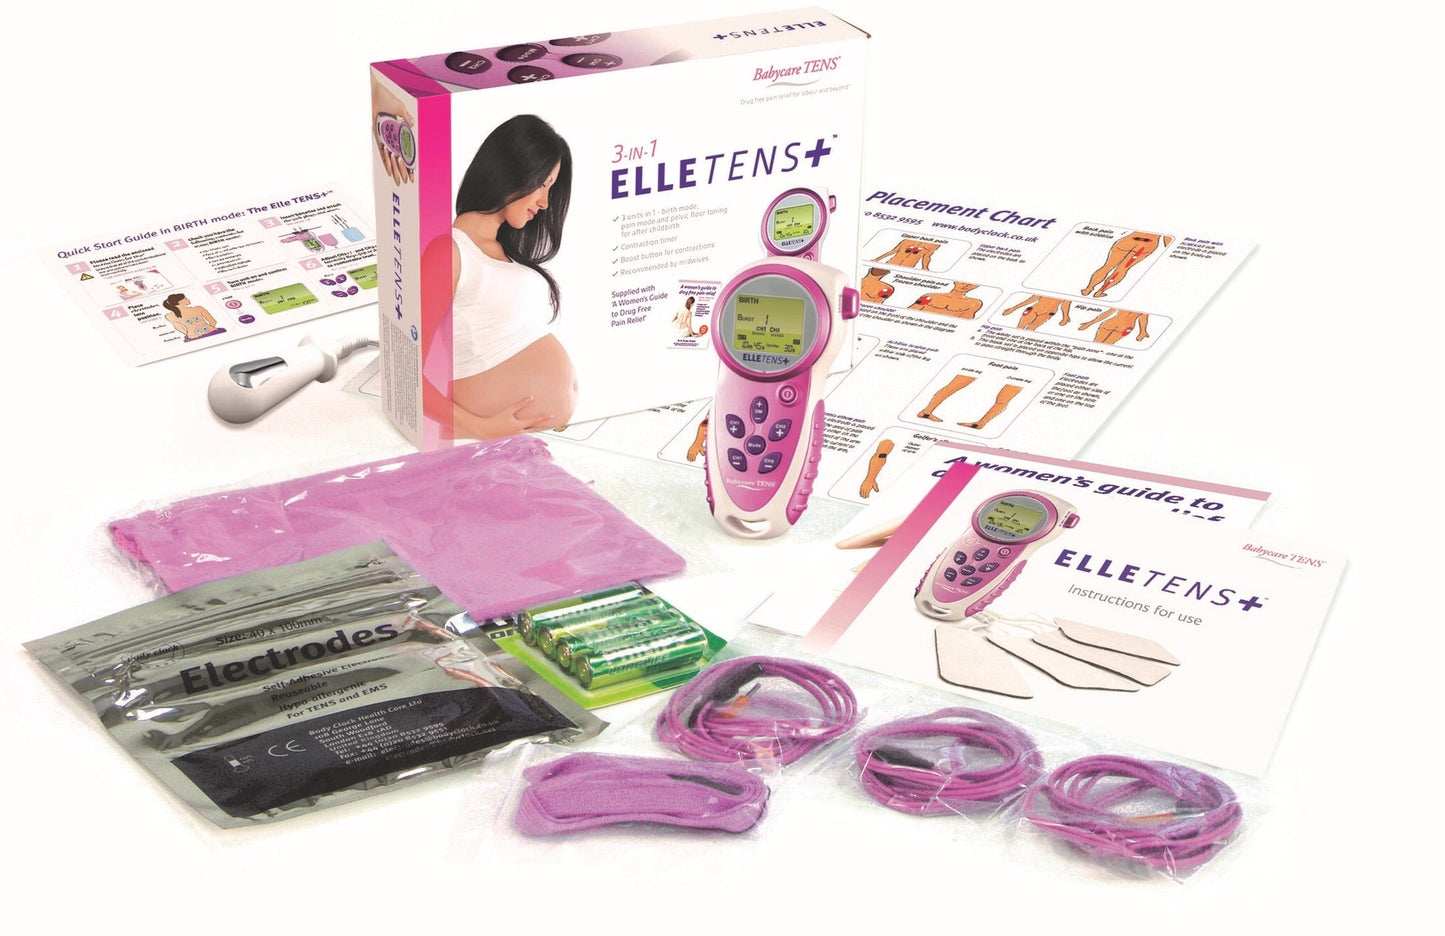 Image shows complete package. 3-in-1 Elle Tens plus + machine hand set, Instructions for use, lead wires, batteries, electrodes and a womens guide to drug free pain relief